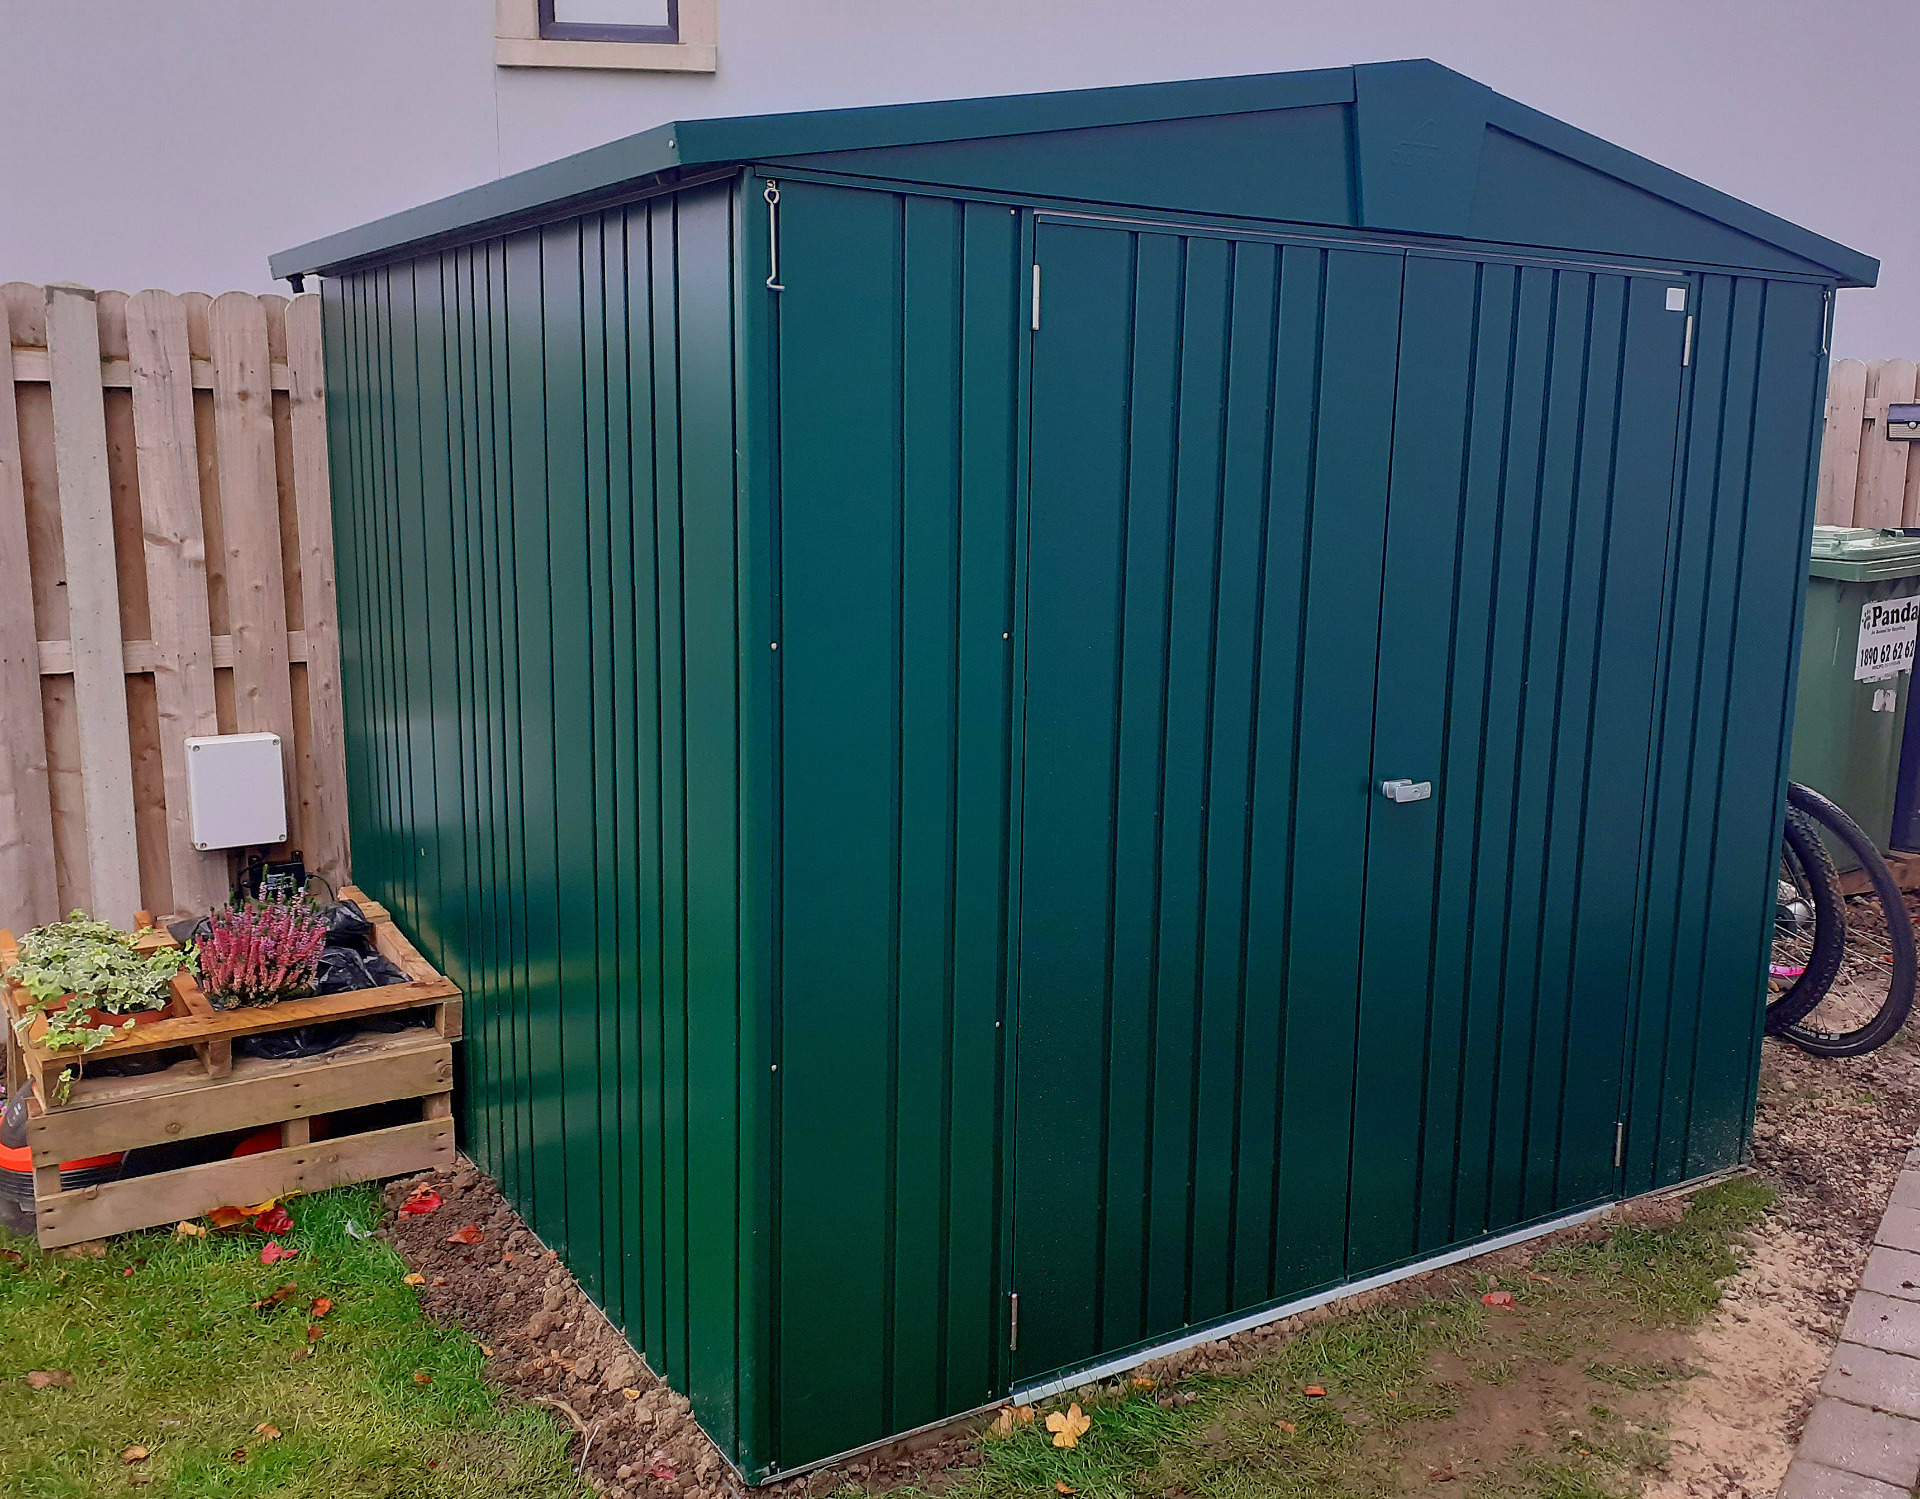 The Biohort Europa Garden Shed, Size 4 (228x244cm) in metallic dark green comes with Double doors as standard. A quality shed at a reasonable price. Supplied + Fitted by Owen Chubb in Terenure, Dublin 6W. Tel 087-2306 128.